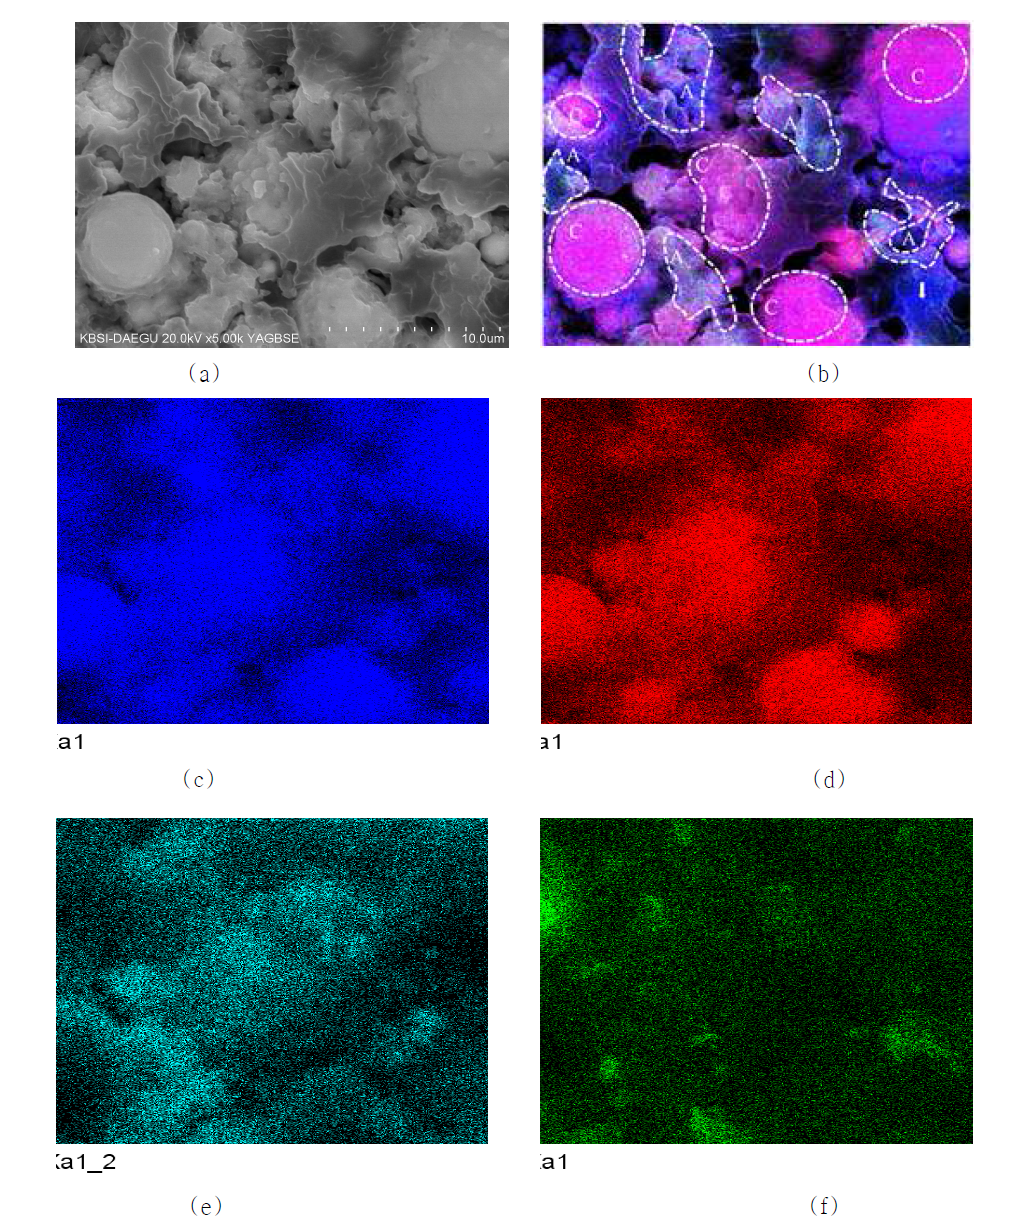 SEM and element maps of alkali-activated FA 6 sample: (a) SEM micrograph in BSE mode (YAG BSE), (b) multispectral overlay of Si, Al and Na (blue, red and cyan, respectively), (c) Si distribution, (d) Al distribution, (e) Na distribution and (f) Ca distribution. The area ‘A’ indicates geopolymer and the area ‘C’ displays remaining particle of fly ash. The white arrows indicate dissolved phase of Si